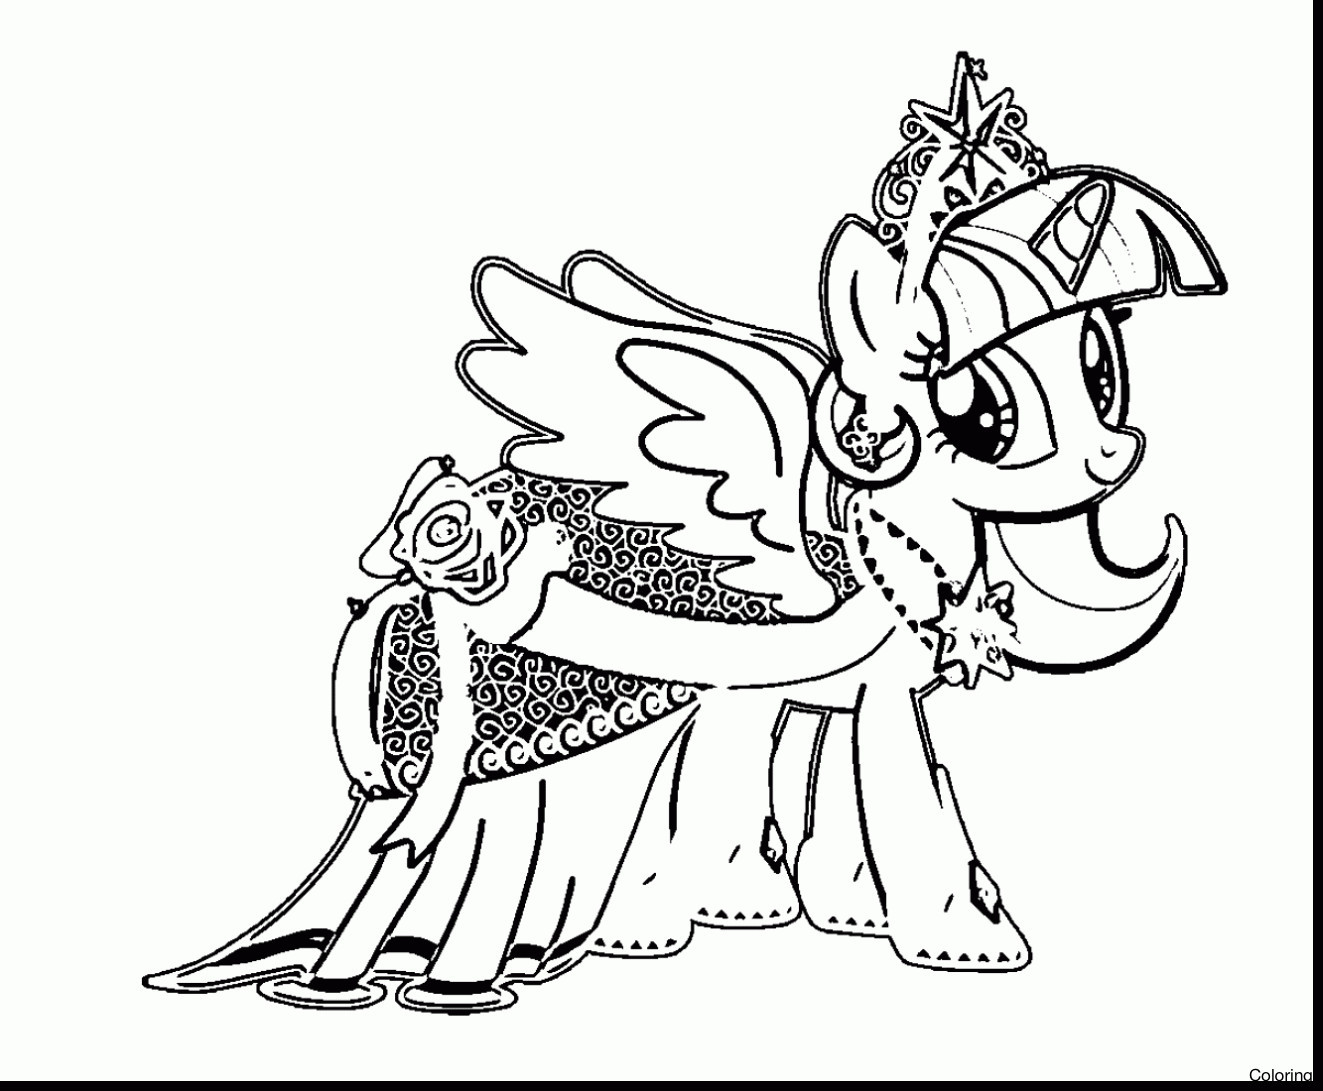 Twilight Coloring Sheets For Girls
 Princess Twilight Coloring Pages thekindproject